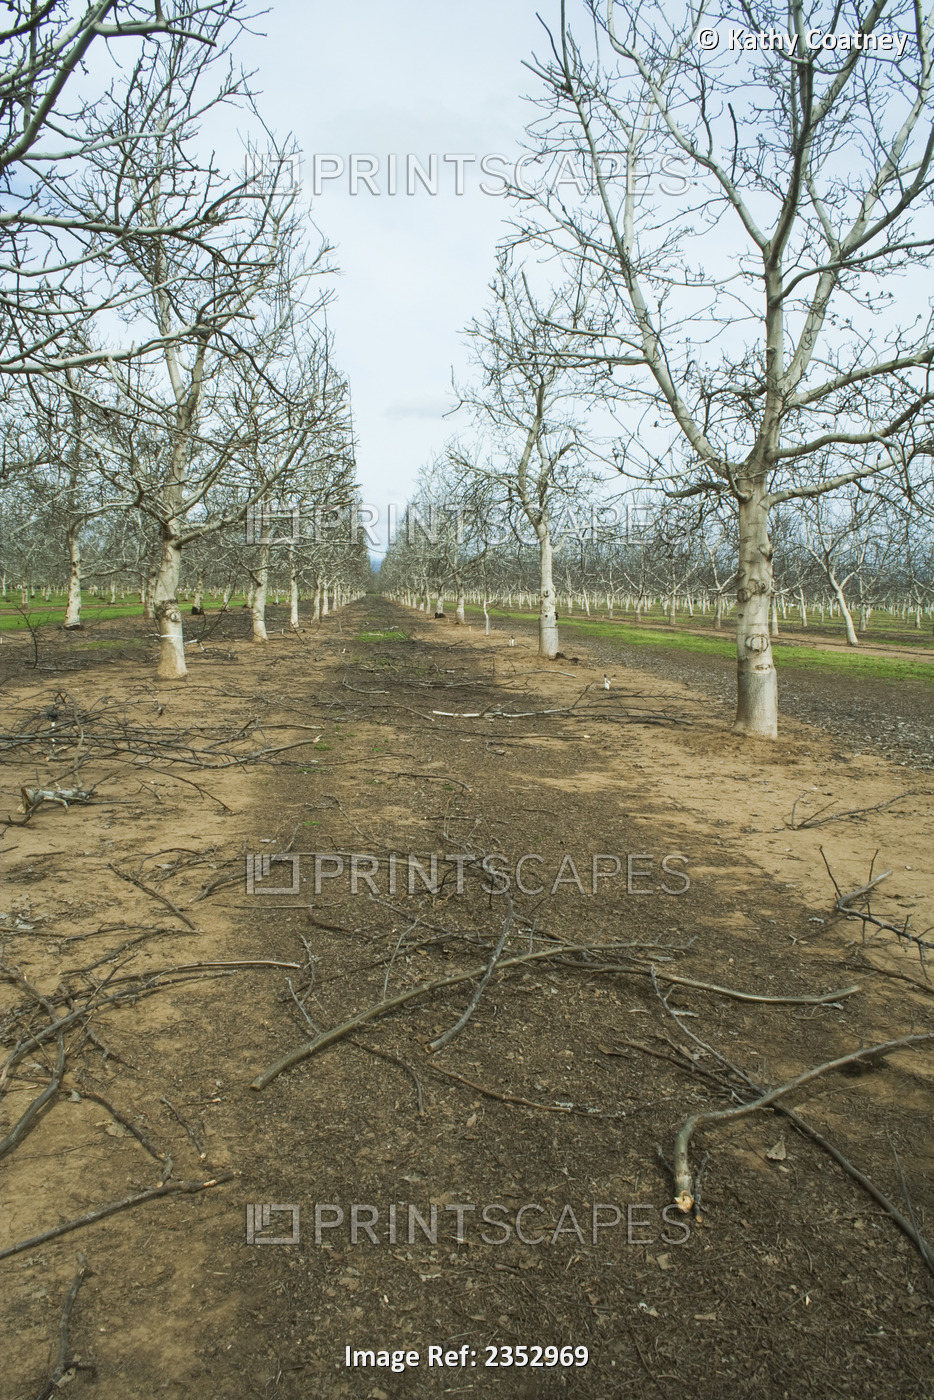 Agriculture - Recently pruned dormant walnut trees in late Winter / near Chico, ...